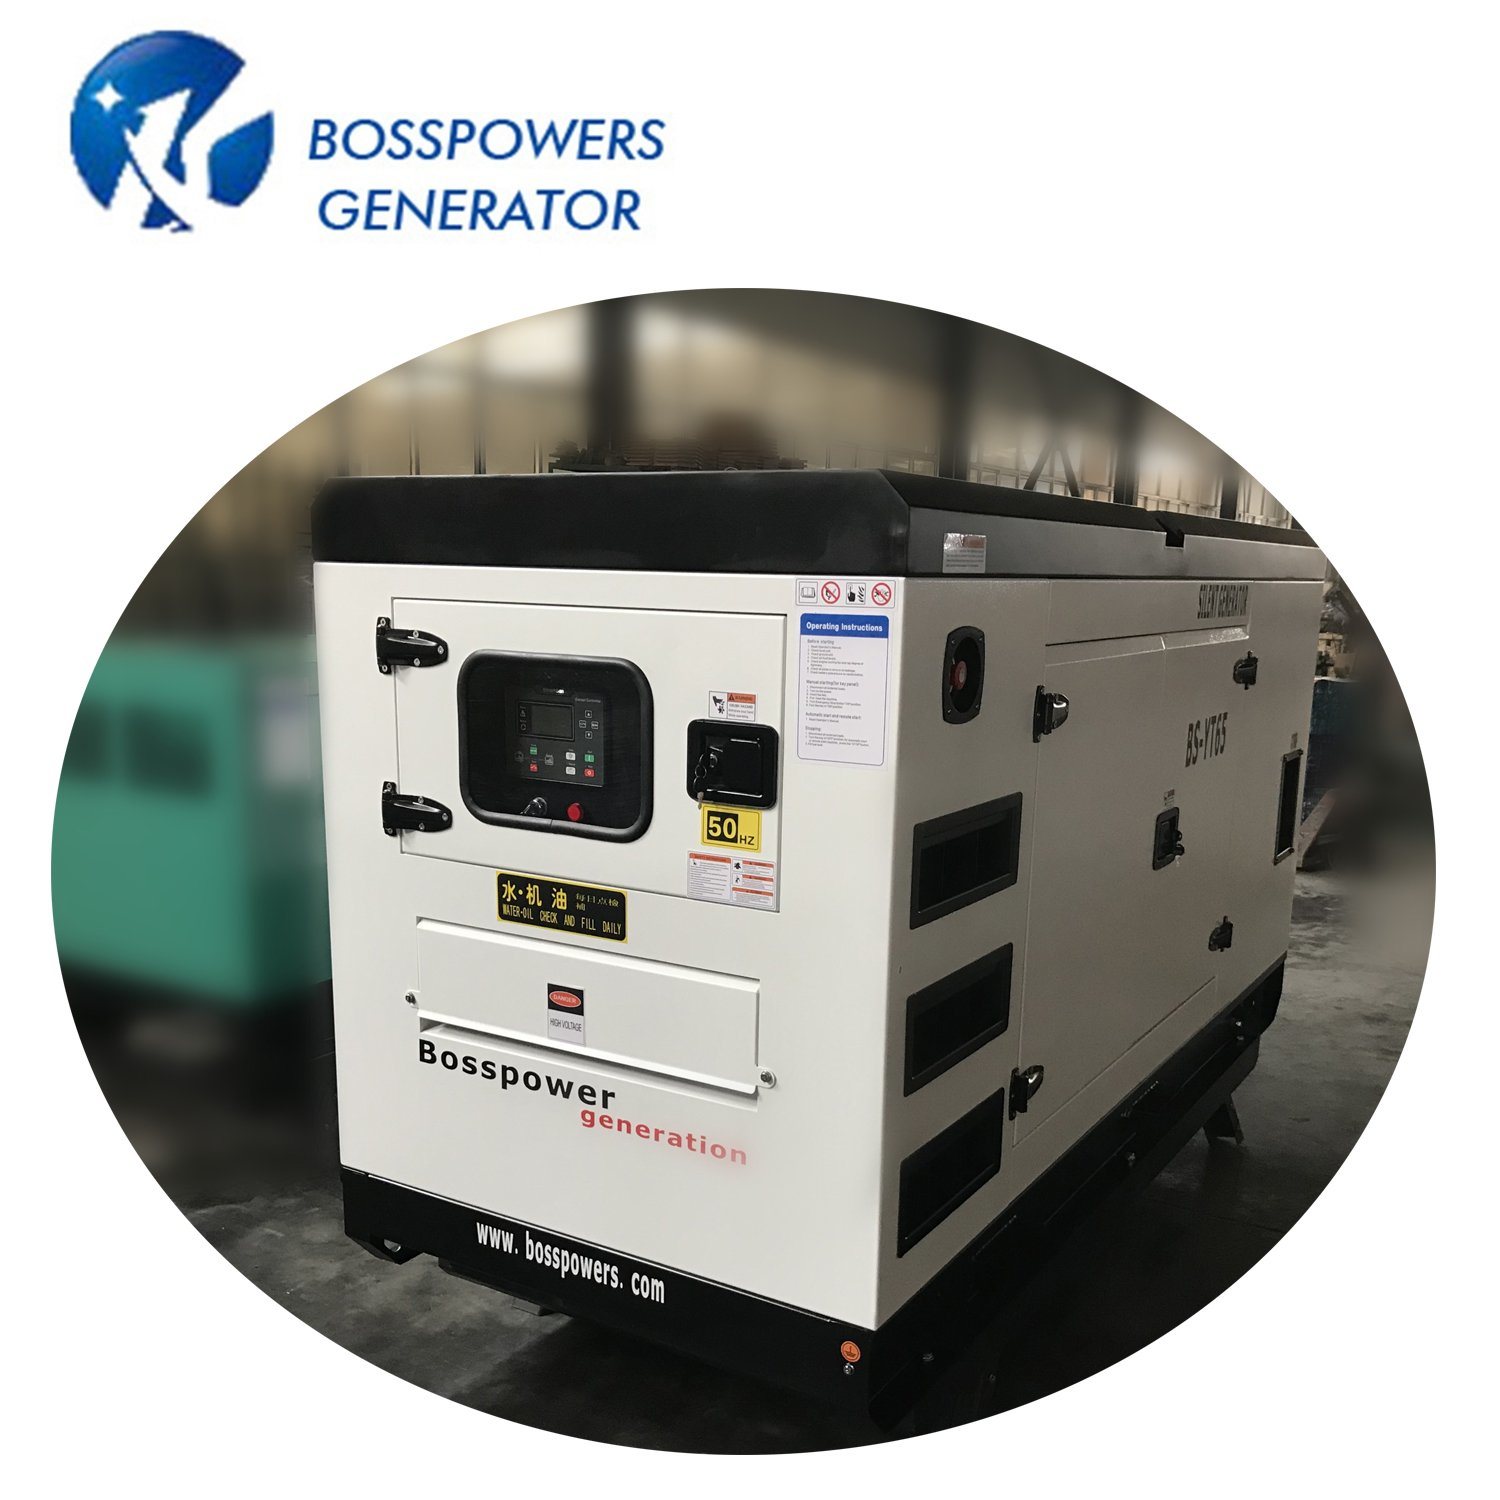 52kw 65kVA Water Cooled Yto (LR4B3Z-D) Diesel Soundproof Electric Generator